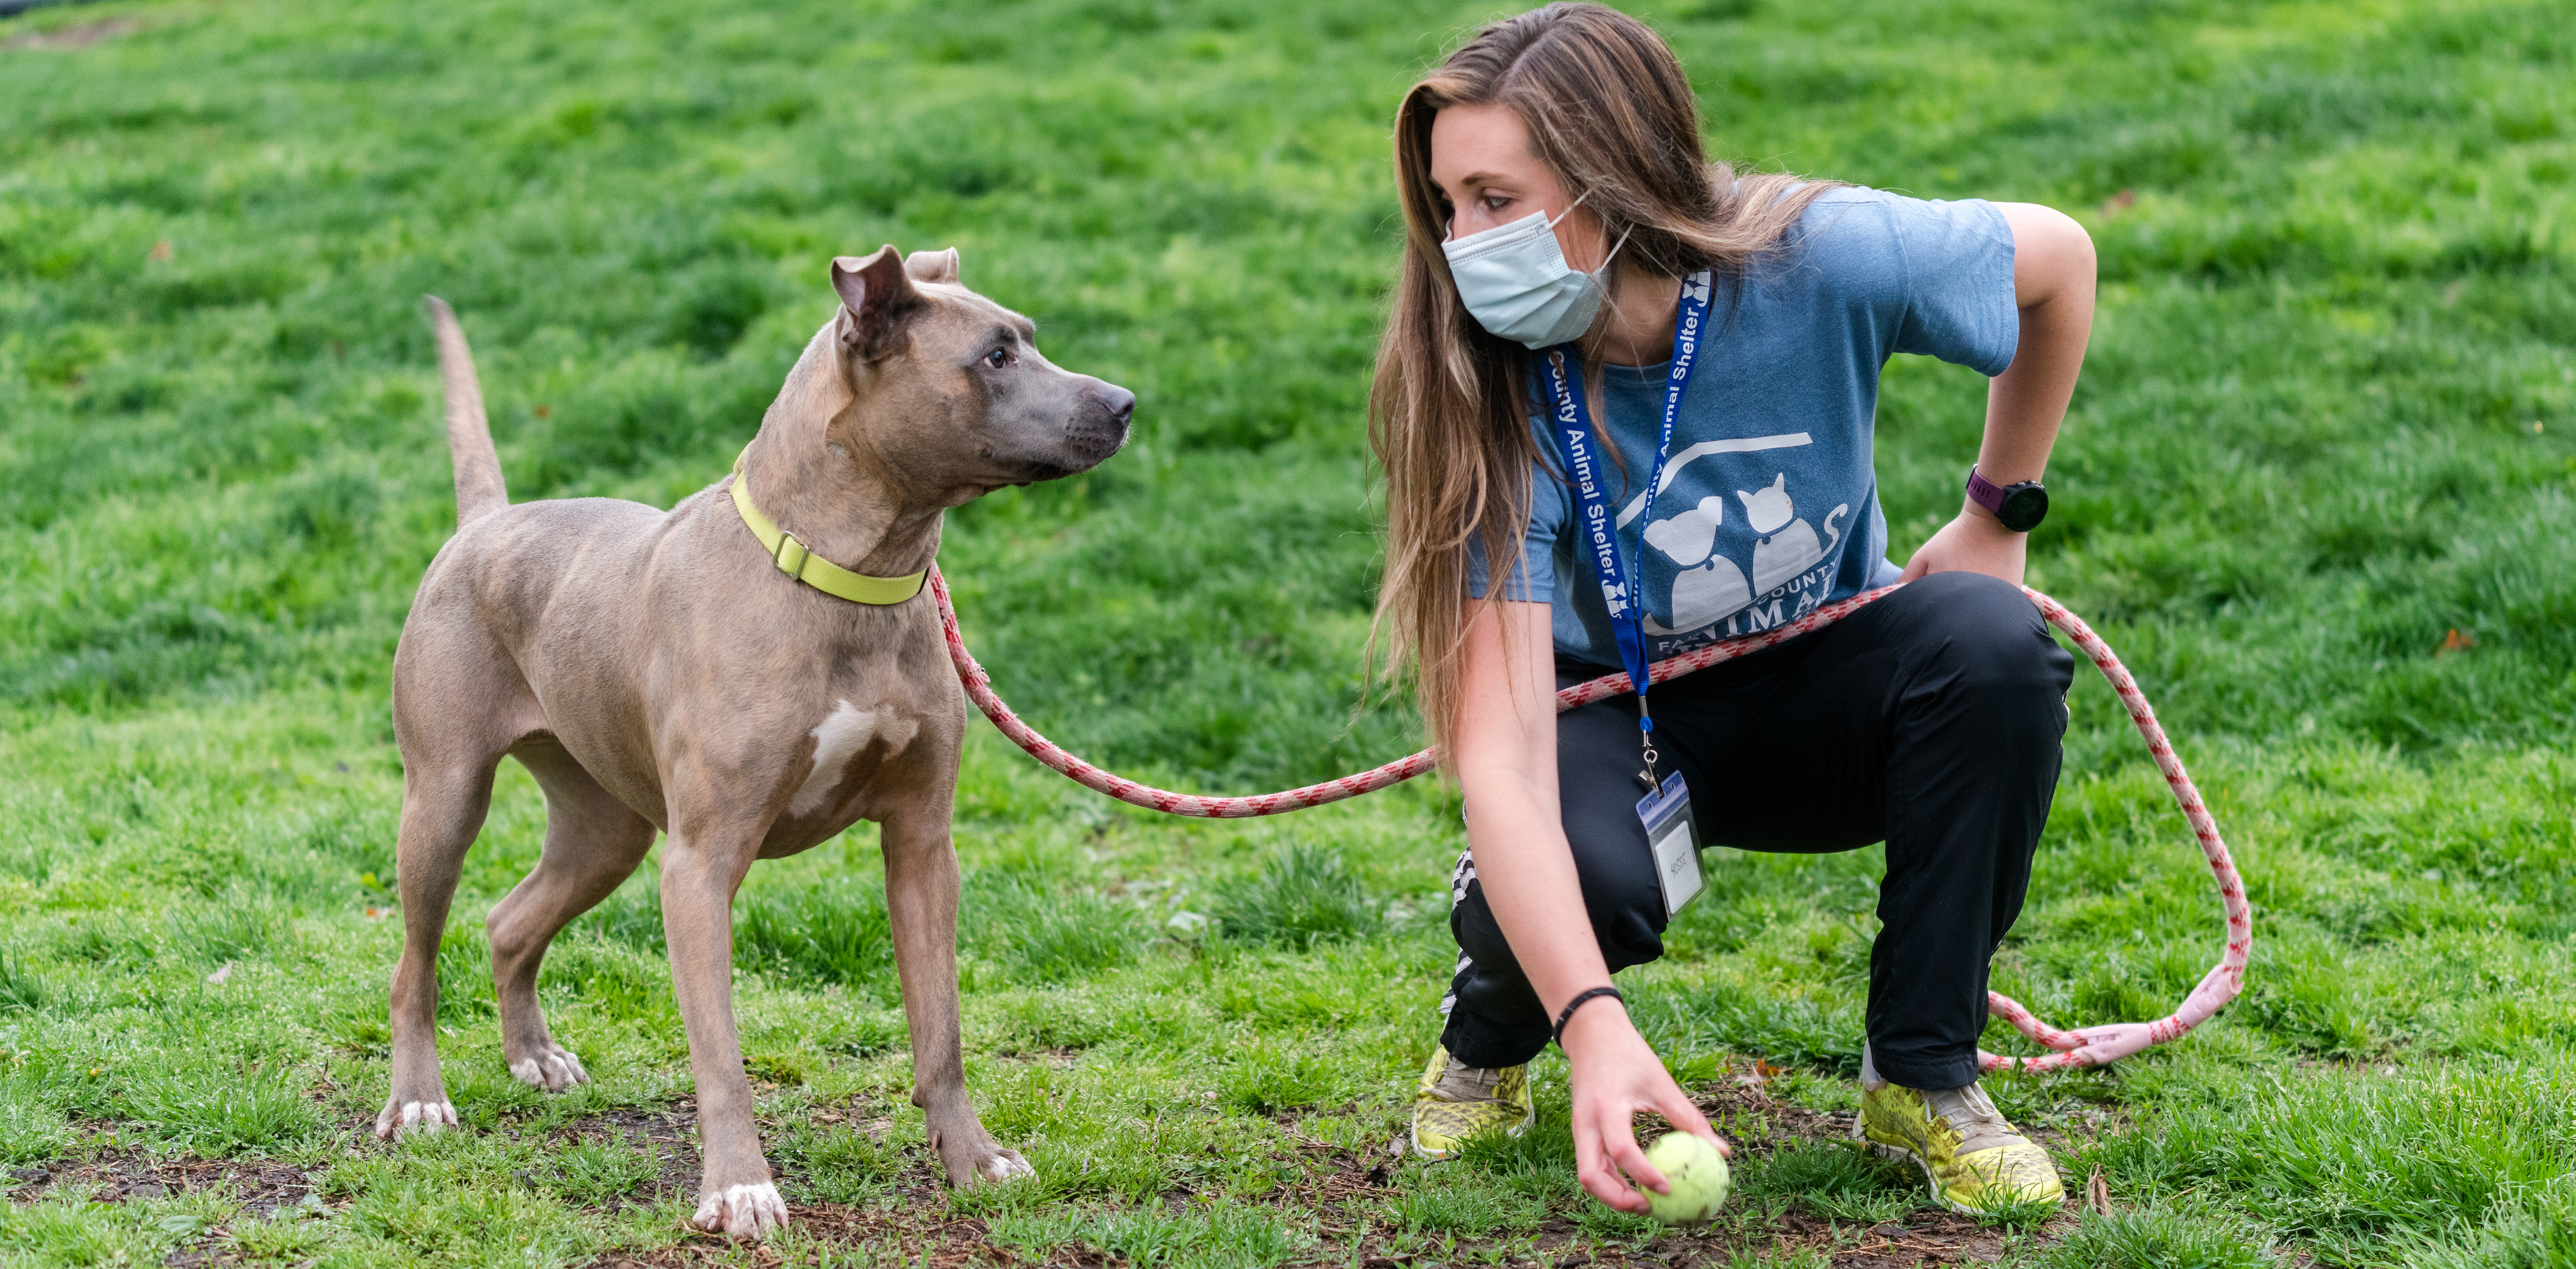 woman in an animal shelter t-shirt kneels next to a gray dog and holds the leash and a tennis ball